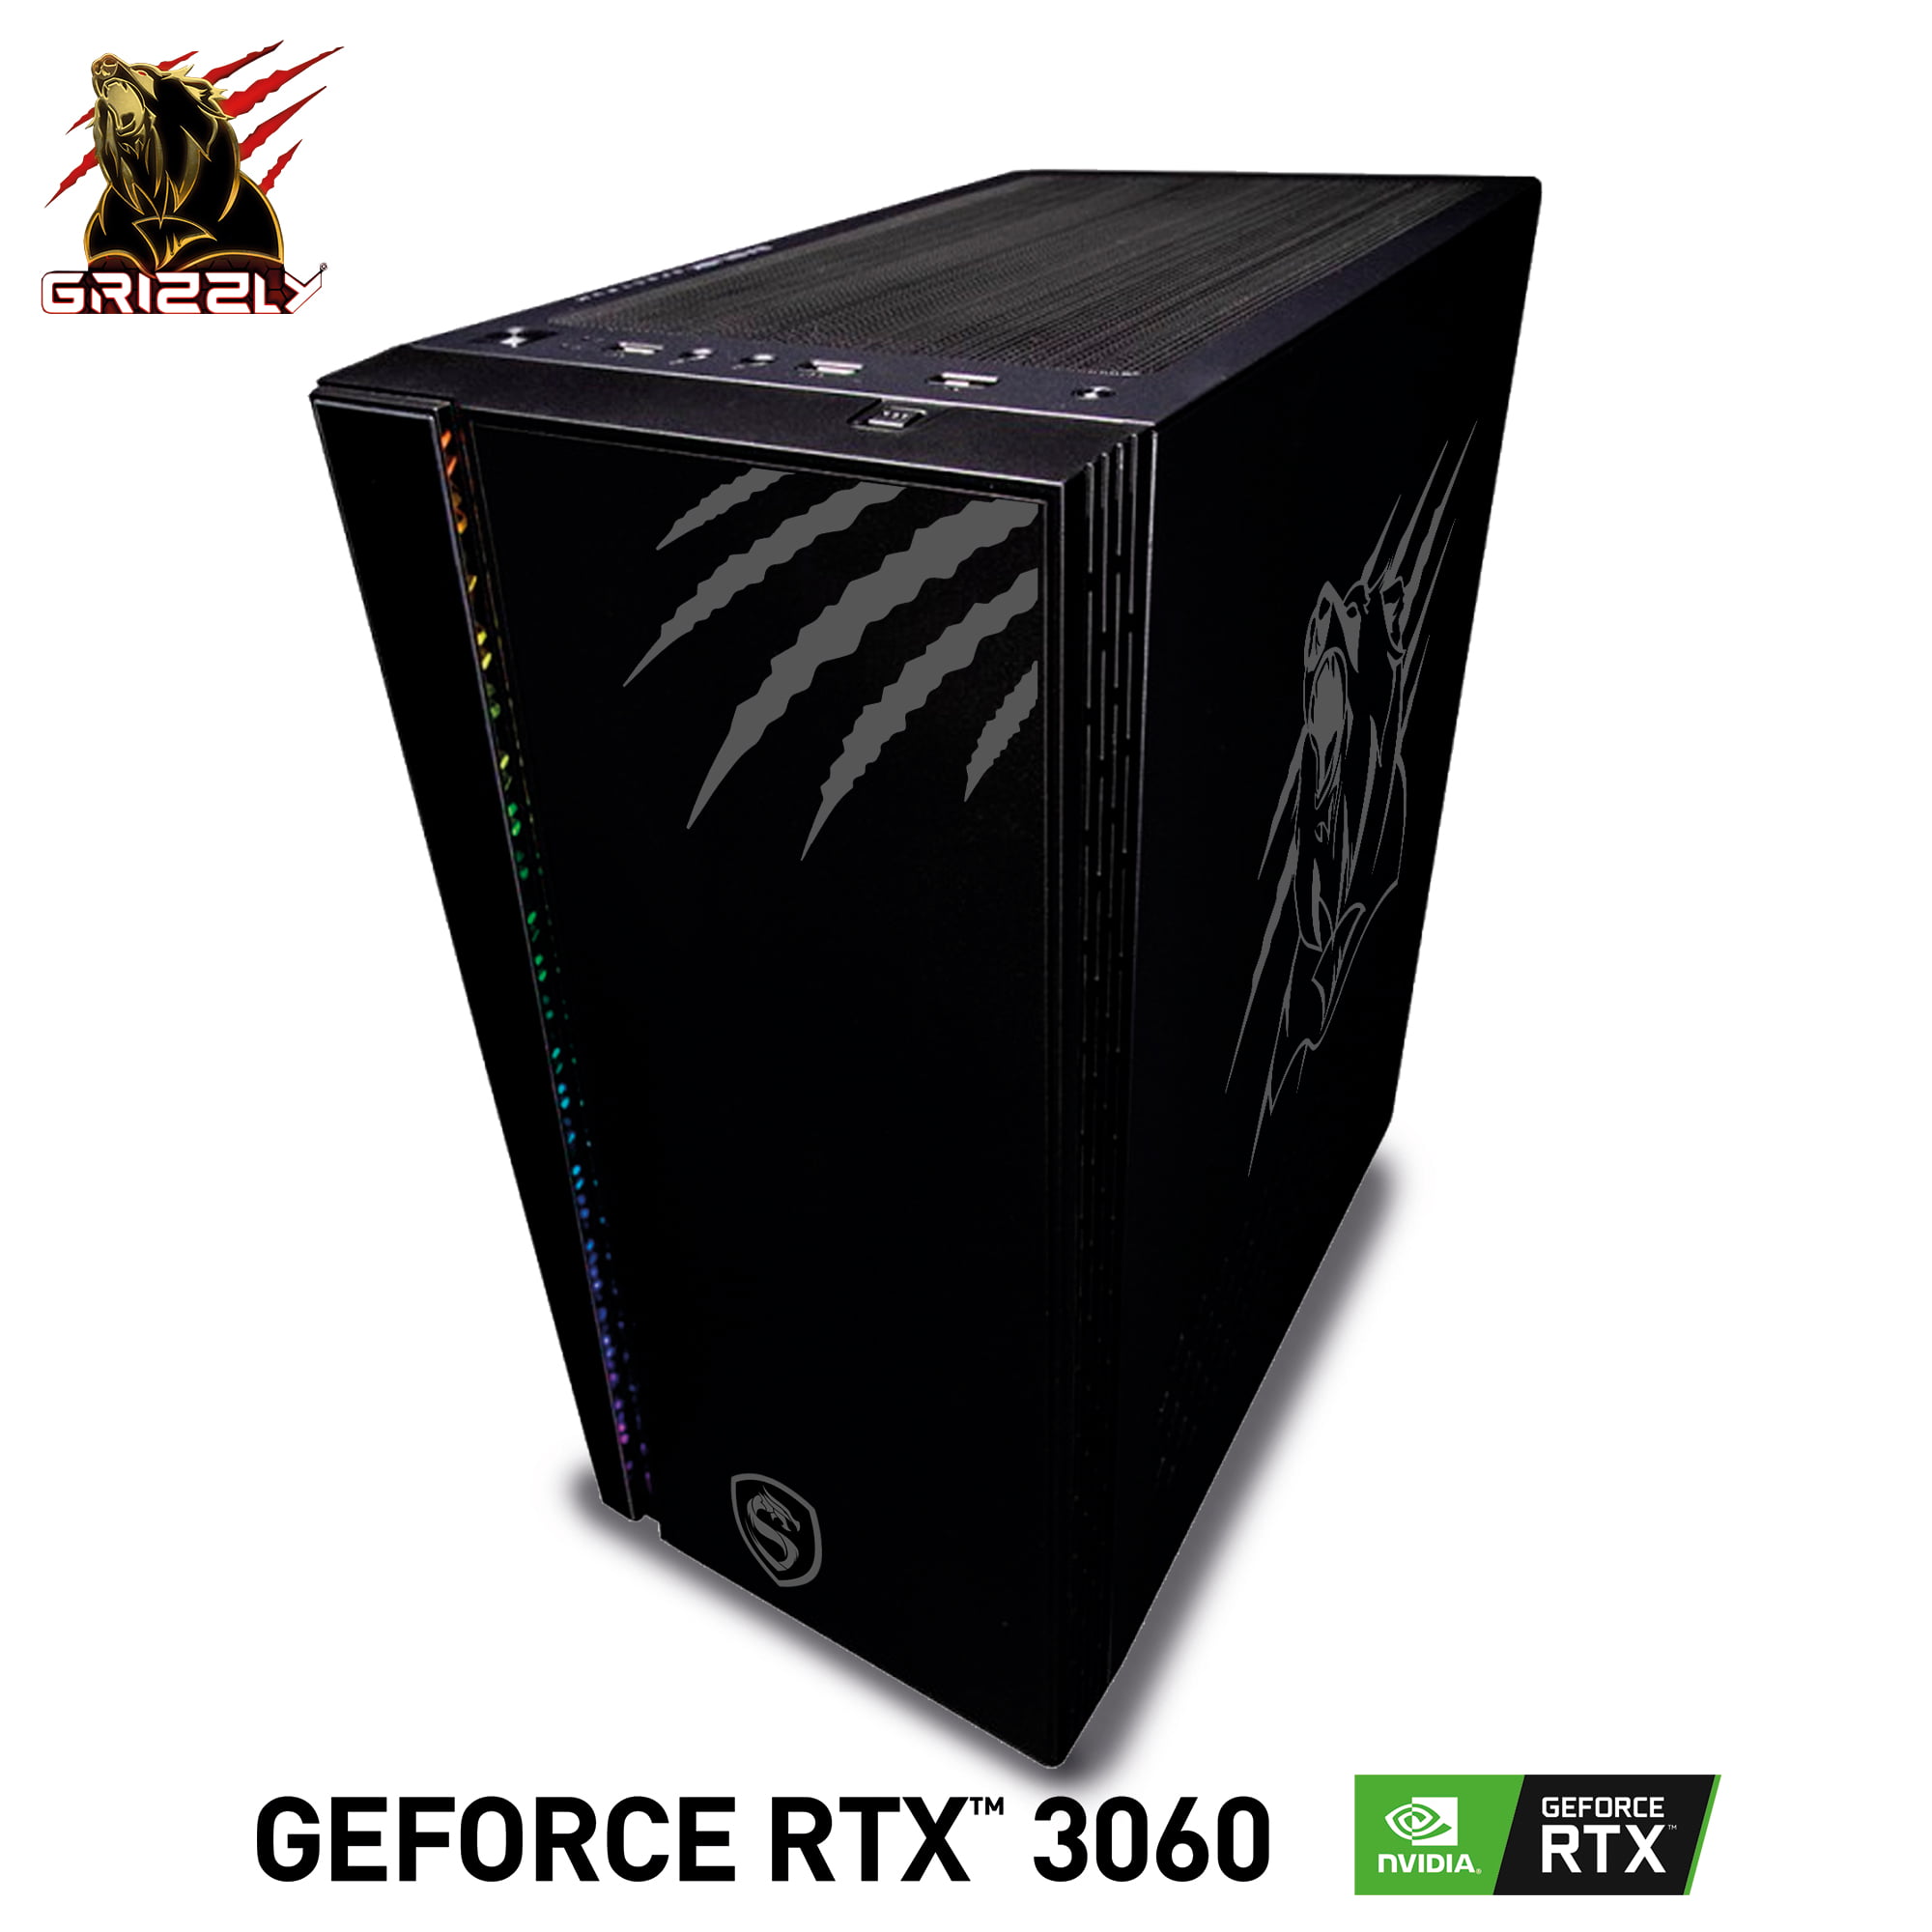 Pc Gamer Grizzly Intel Core I7 10700 Rtx 3060 M.2 1tb Hdd 2tb Monitor 27 Kit  4 En 1 Wifi Bluetooth Color Negro